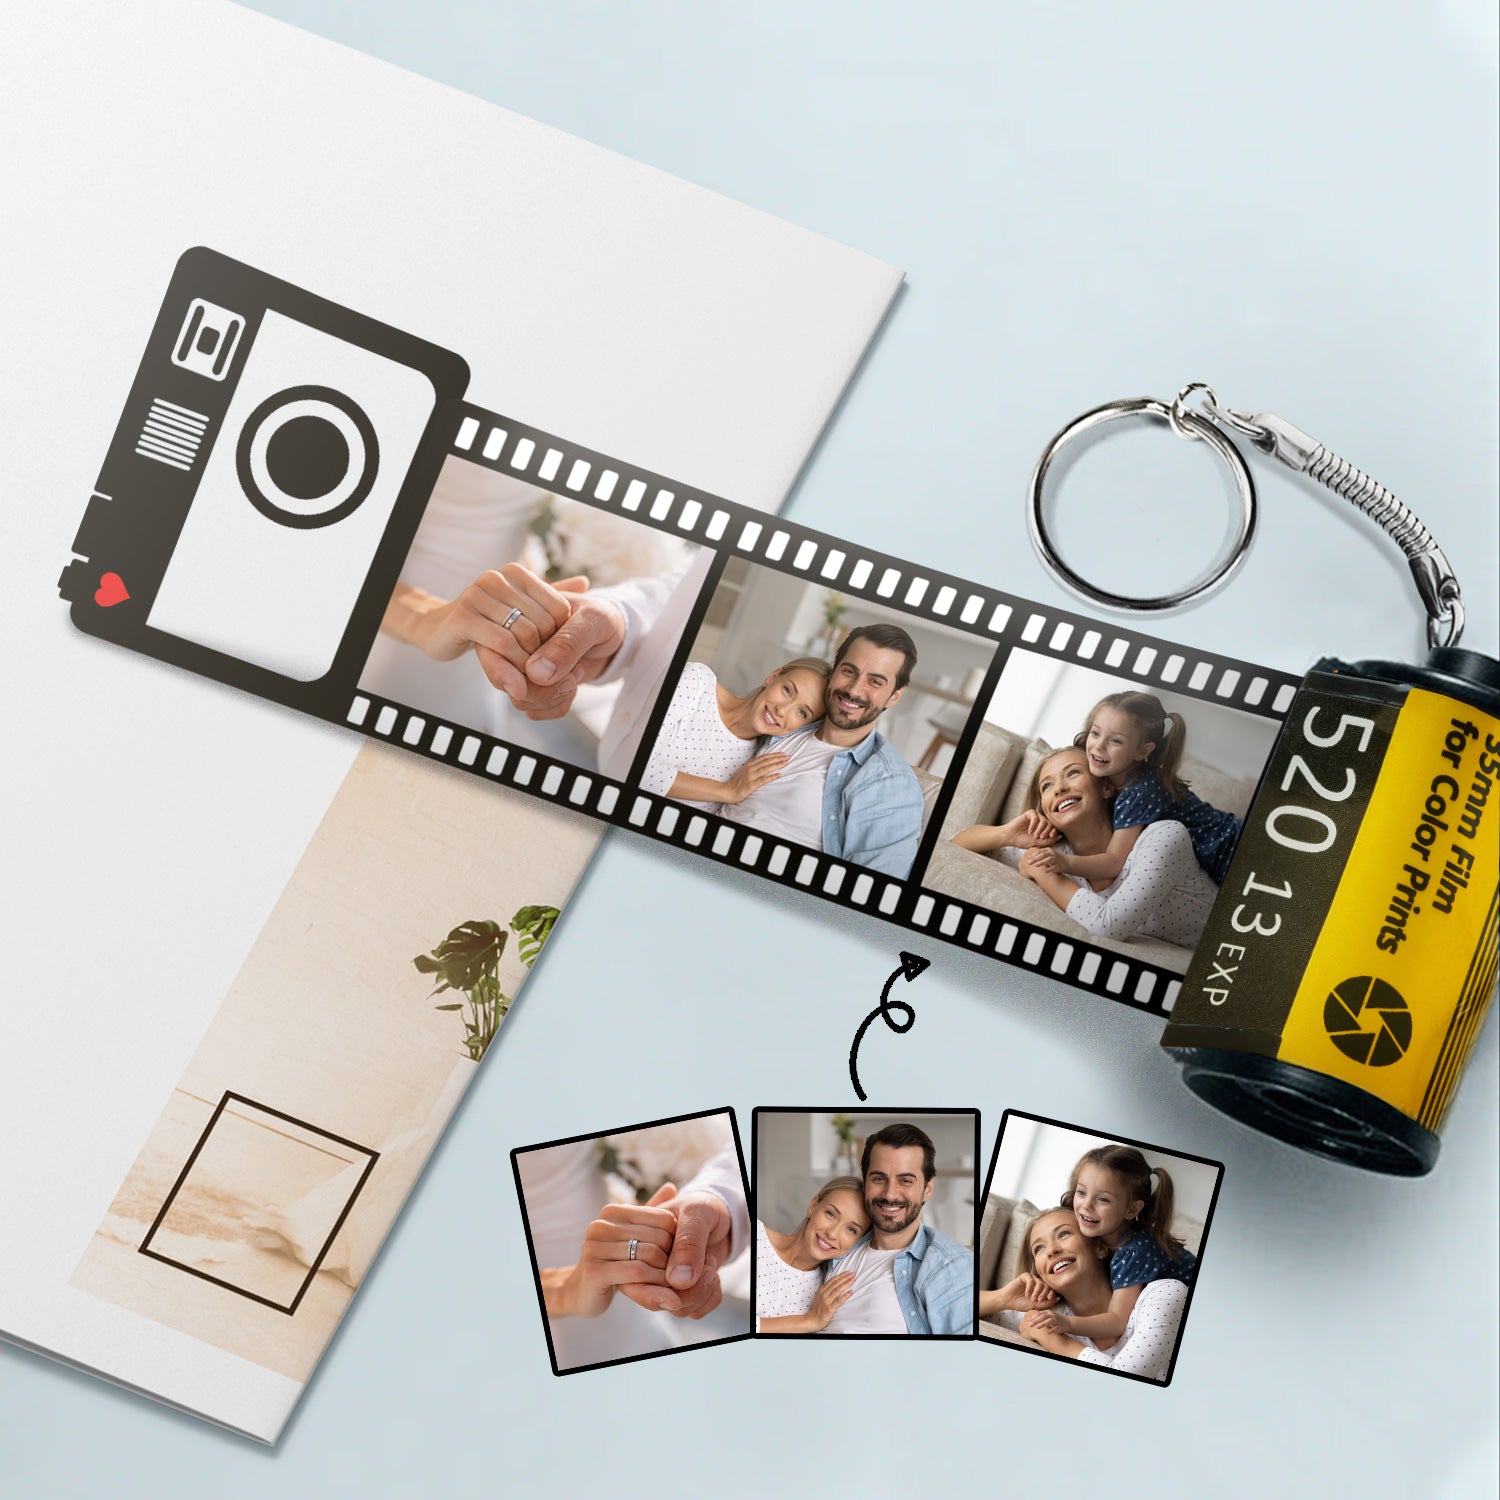 Personalized Photo Film Roll Customized Photo Gift Anniversary